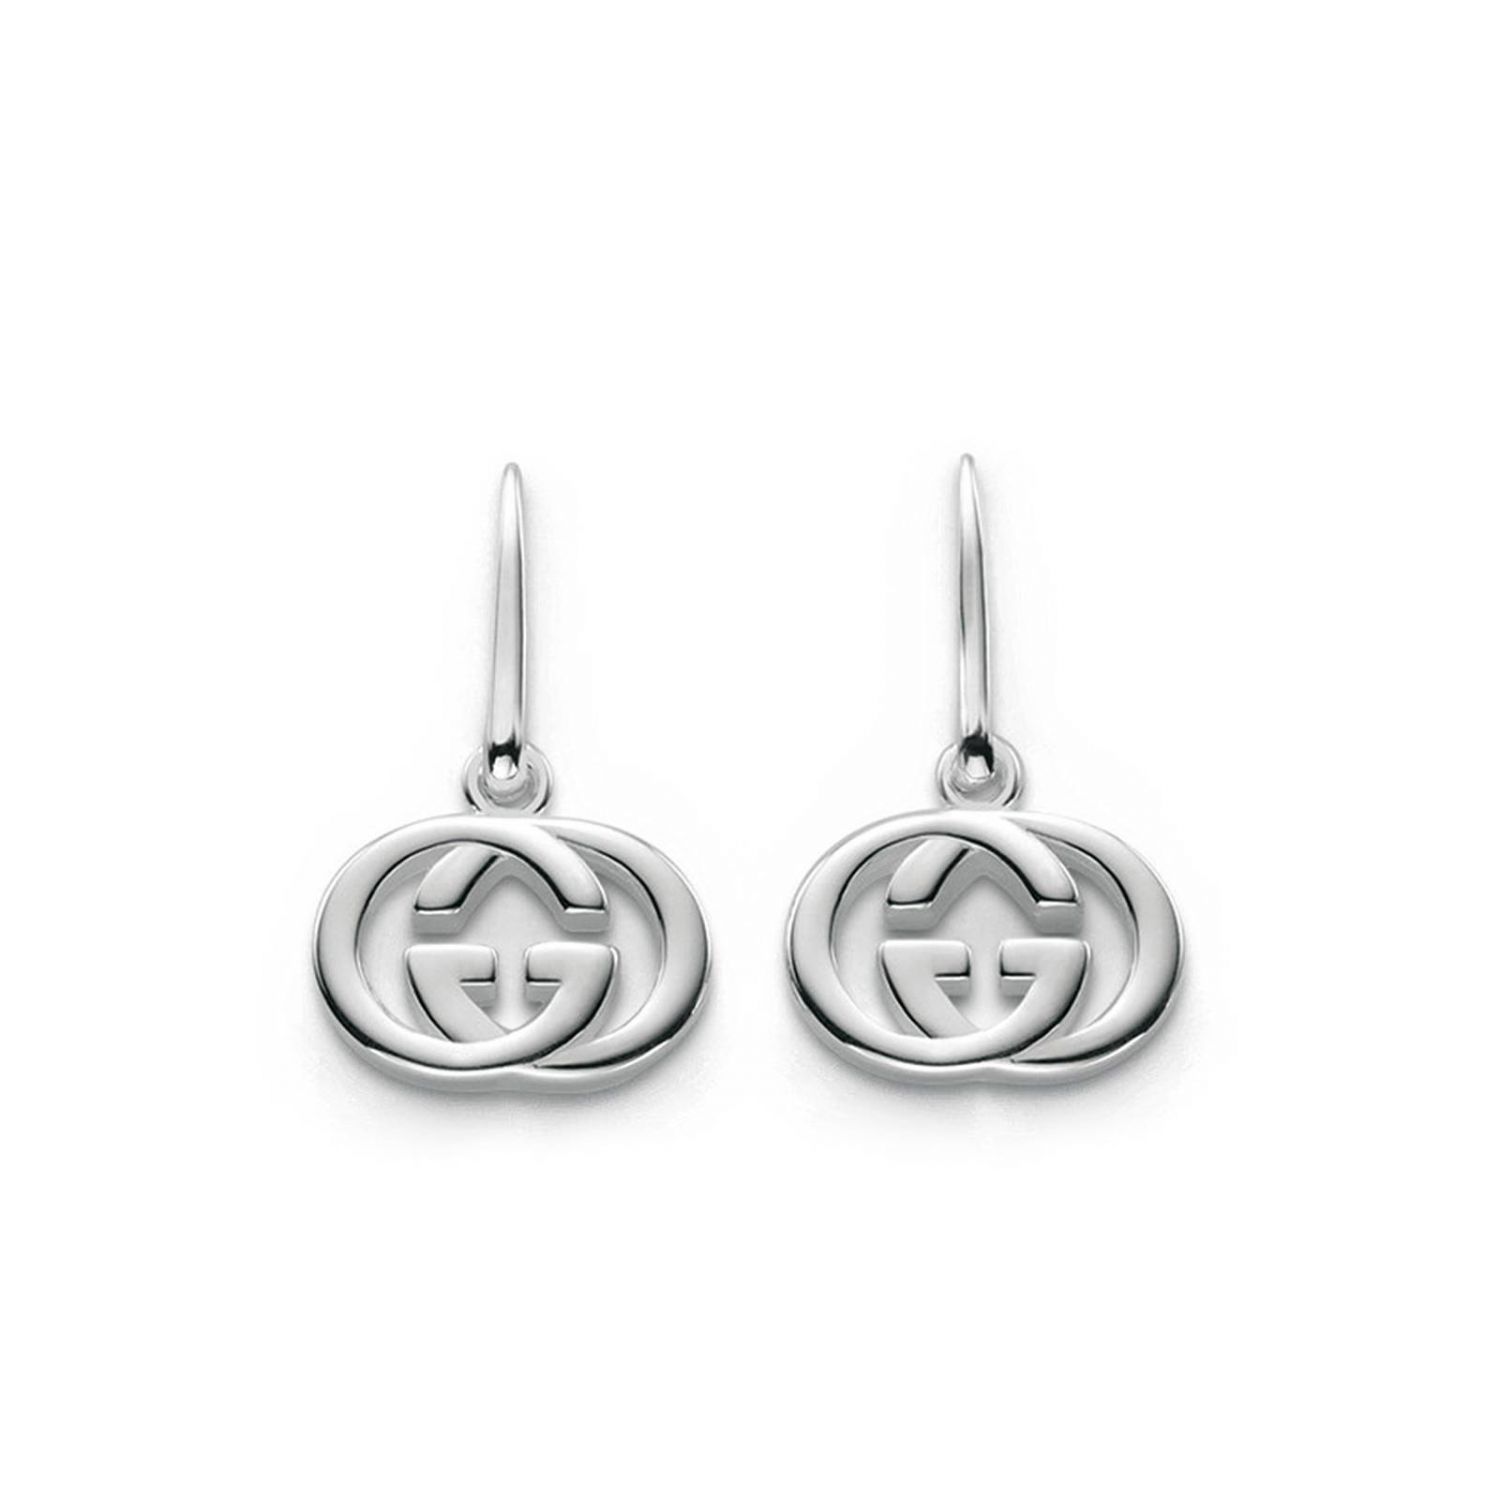 GUCCI: Britt 25 mm earrings with 925 silver 